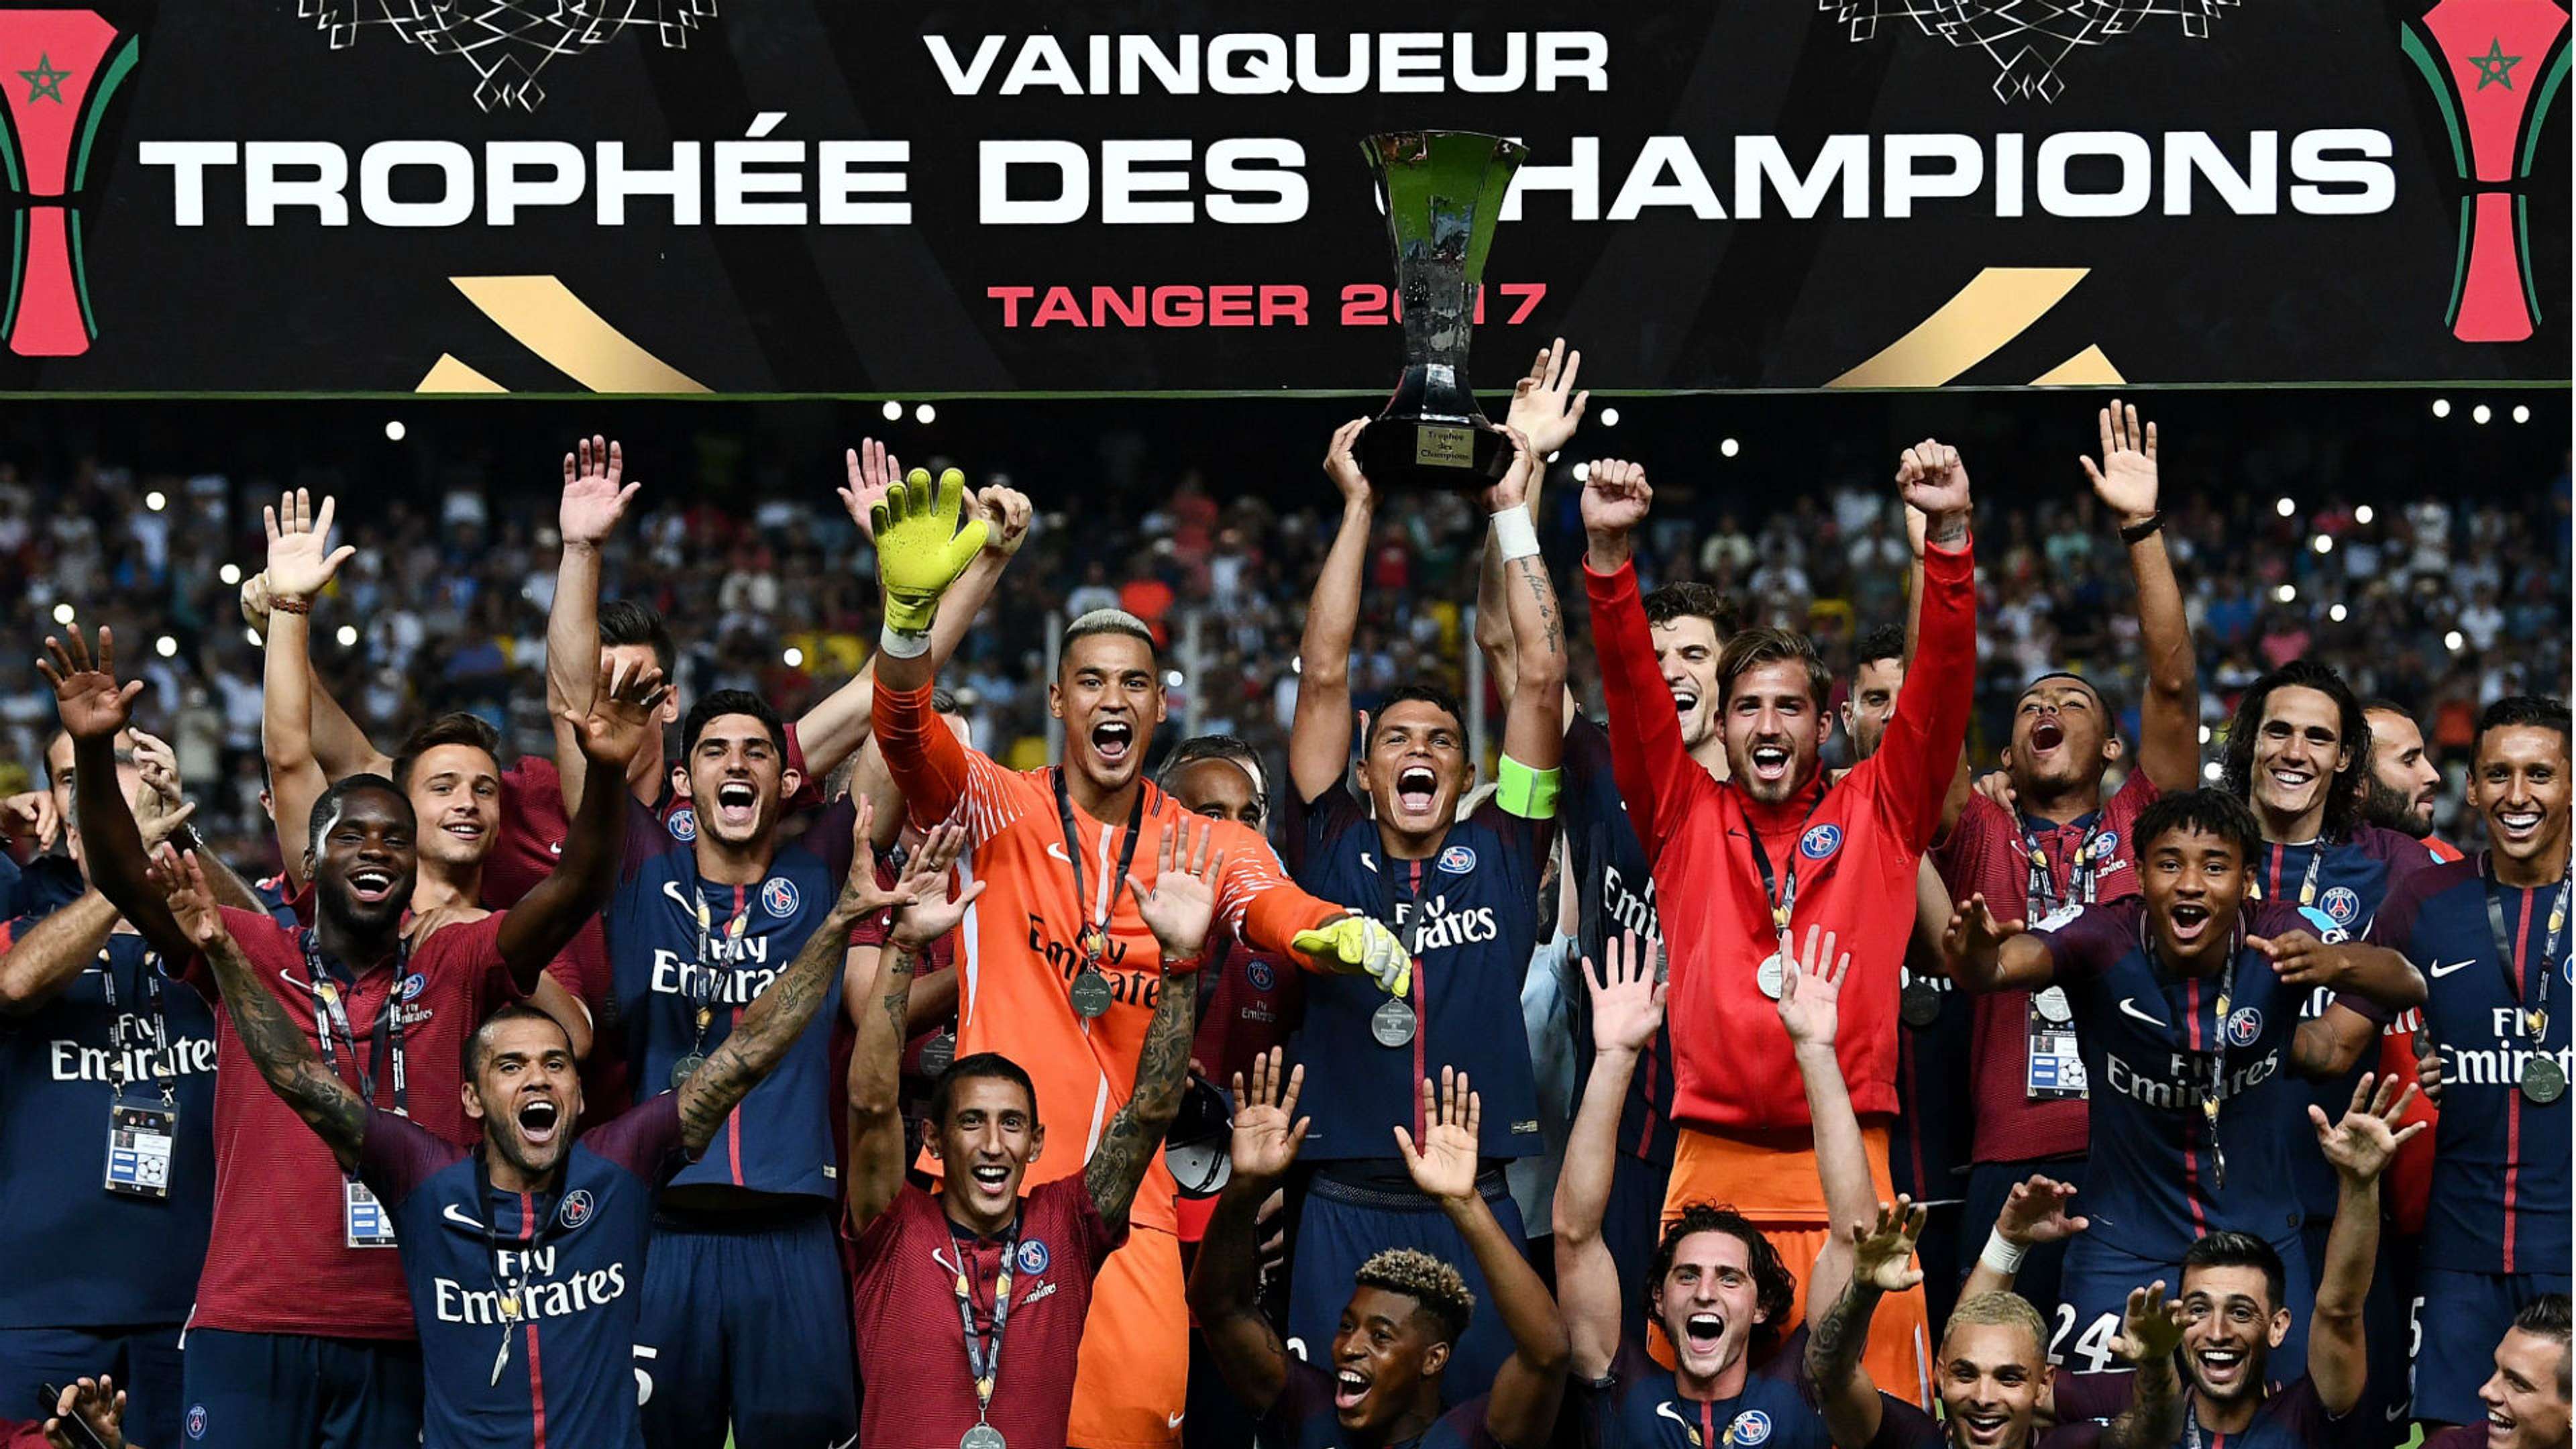 PSG win 2017 French Trophee des Champions in Tangiers